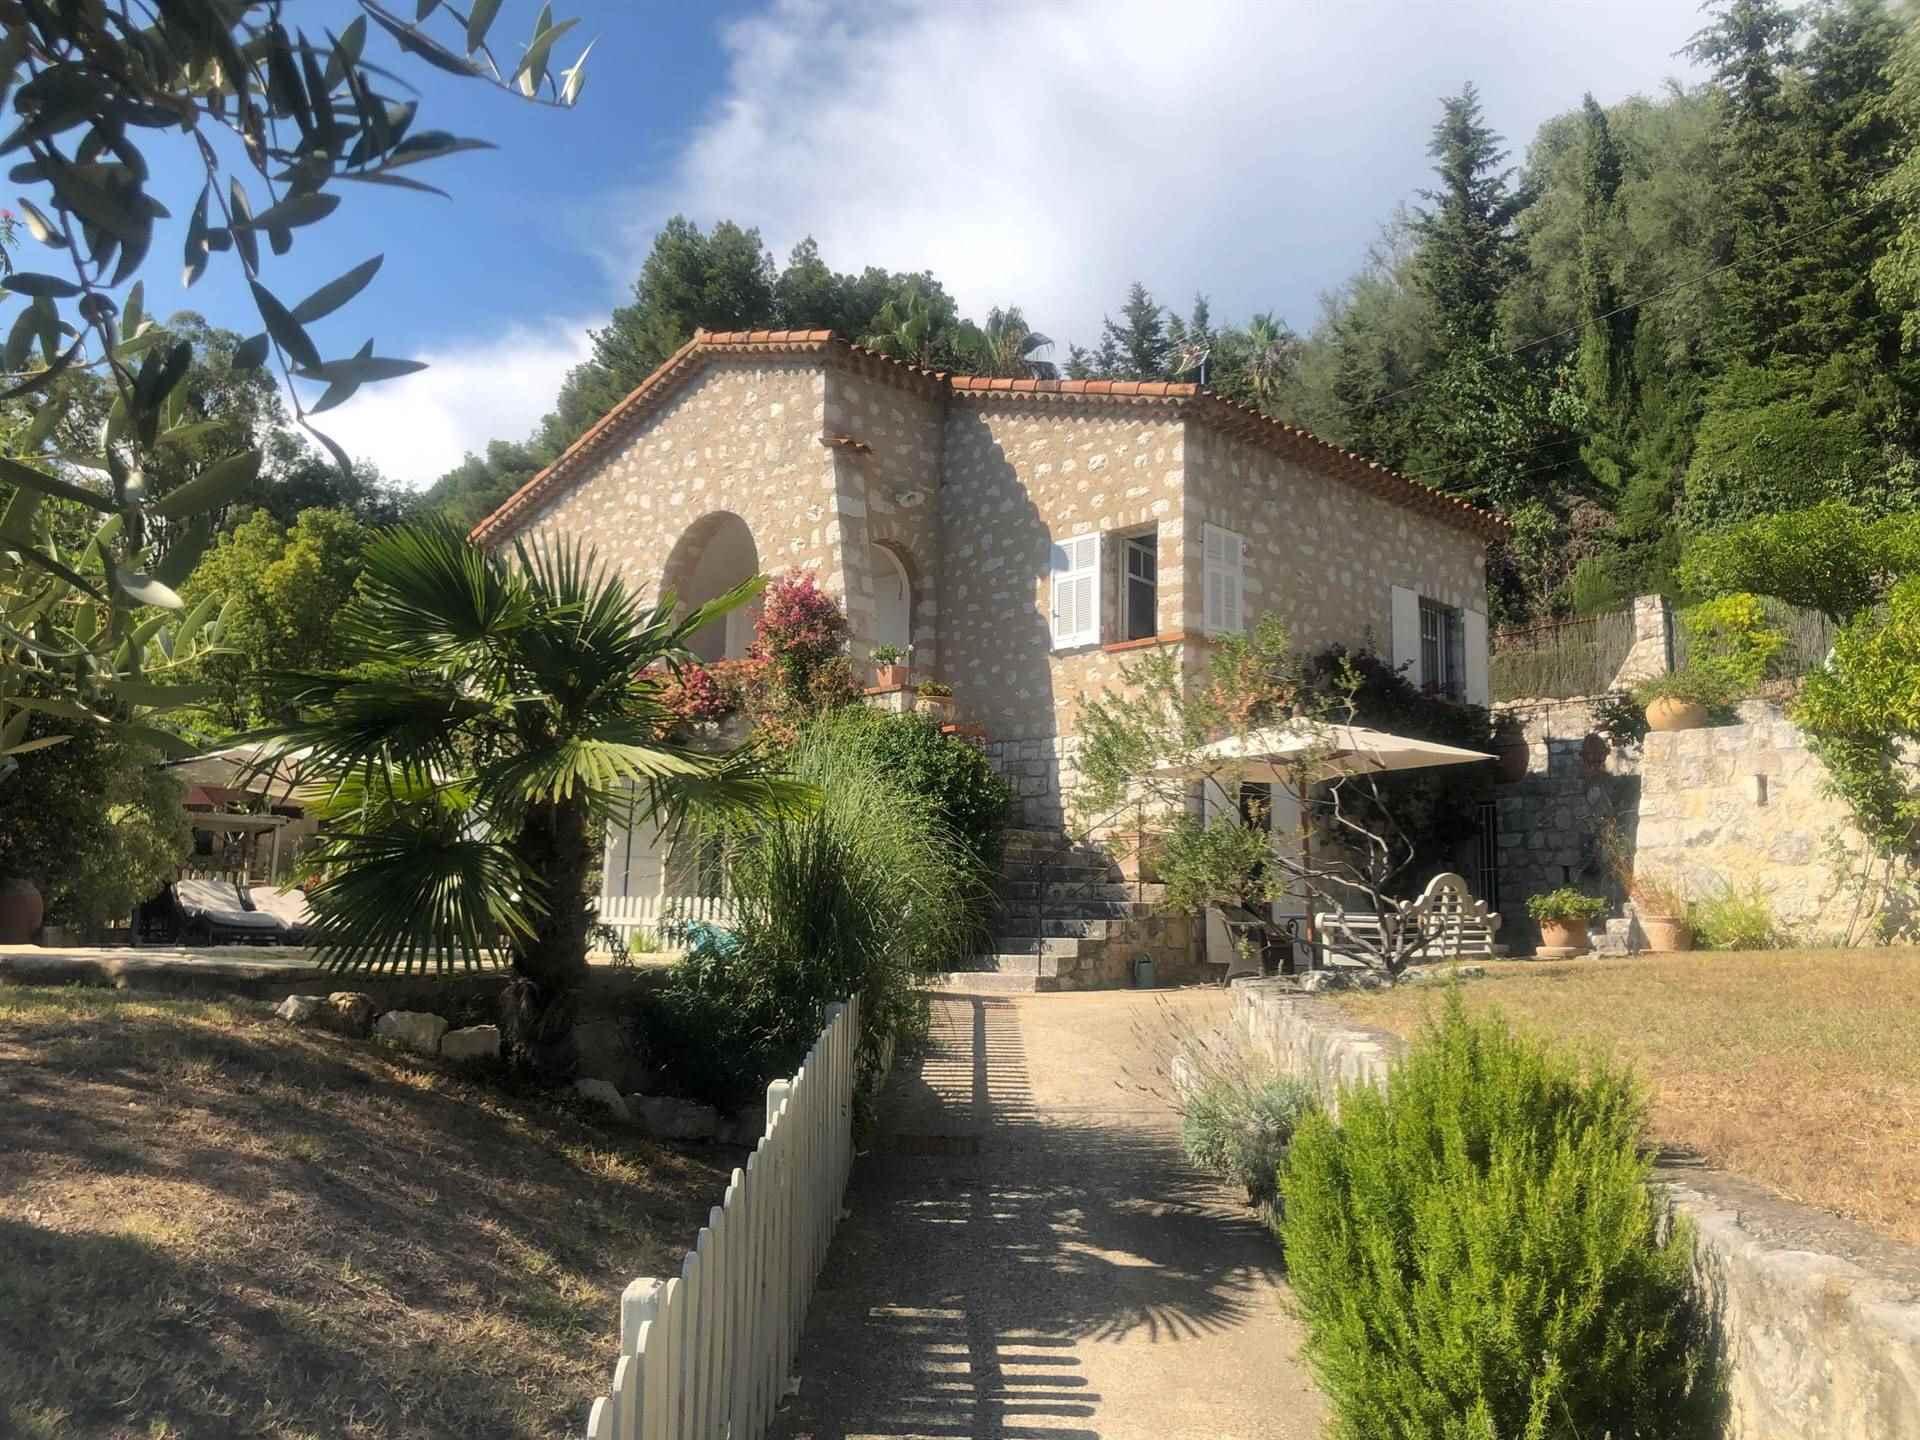 ST PAUL DE VENCE, Villa for sale of 180 Sq. mt., Good condition, Heating Individual heating system, Energetic class: D, composed by: 10 Rooms, 